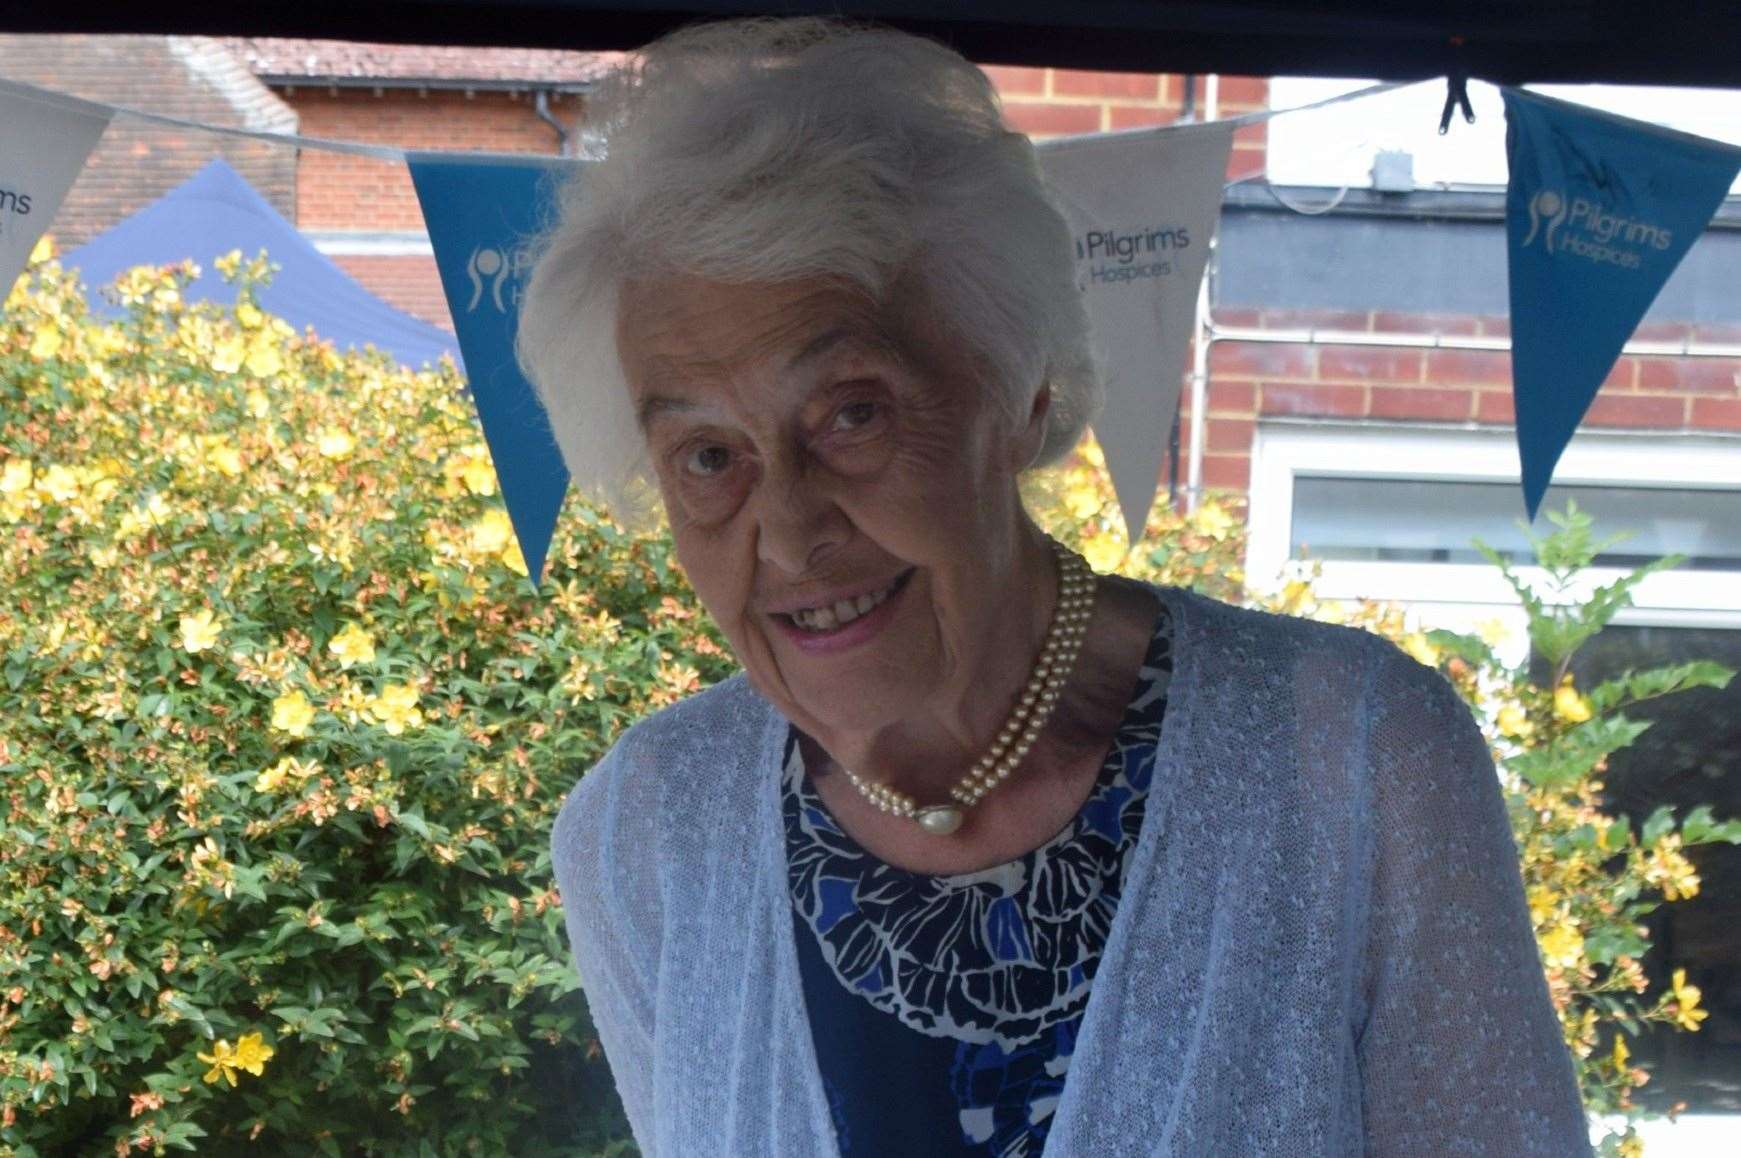 Ann Robertson, founder and president of the Pilgrims Hospice in Canterbury, Thanet and Ashford, has died aged 89